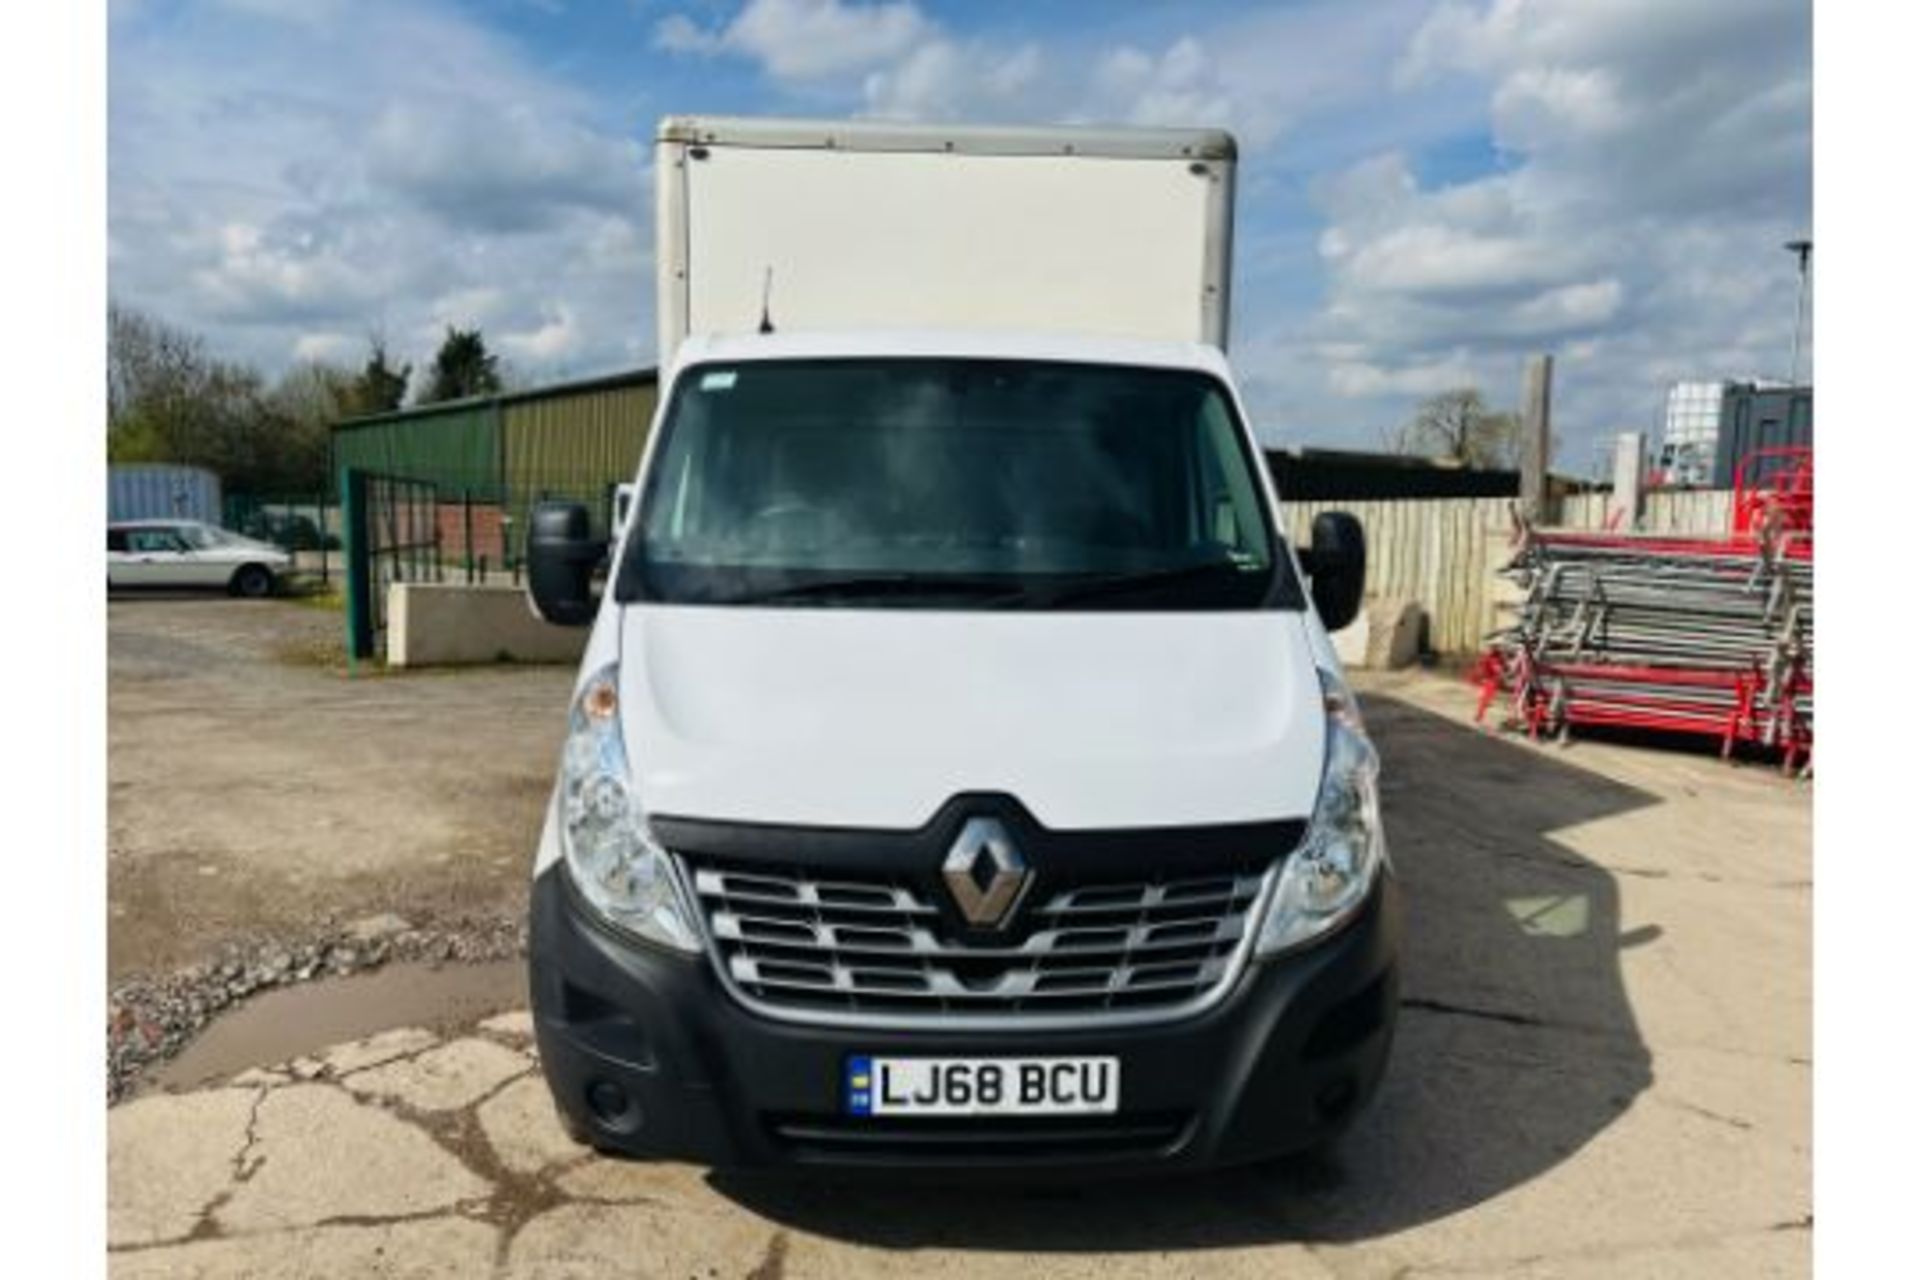 Reserve Met -RENAULT MASTER 2.3DCI (130) Business Edition Lwb Box Van With Electric Tail Lift 68 Reg - Image 4 of 27